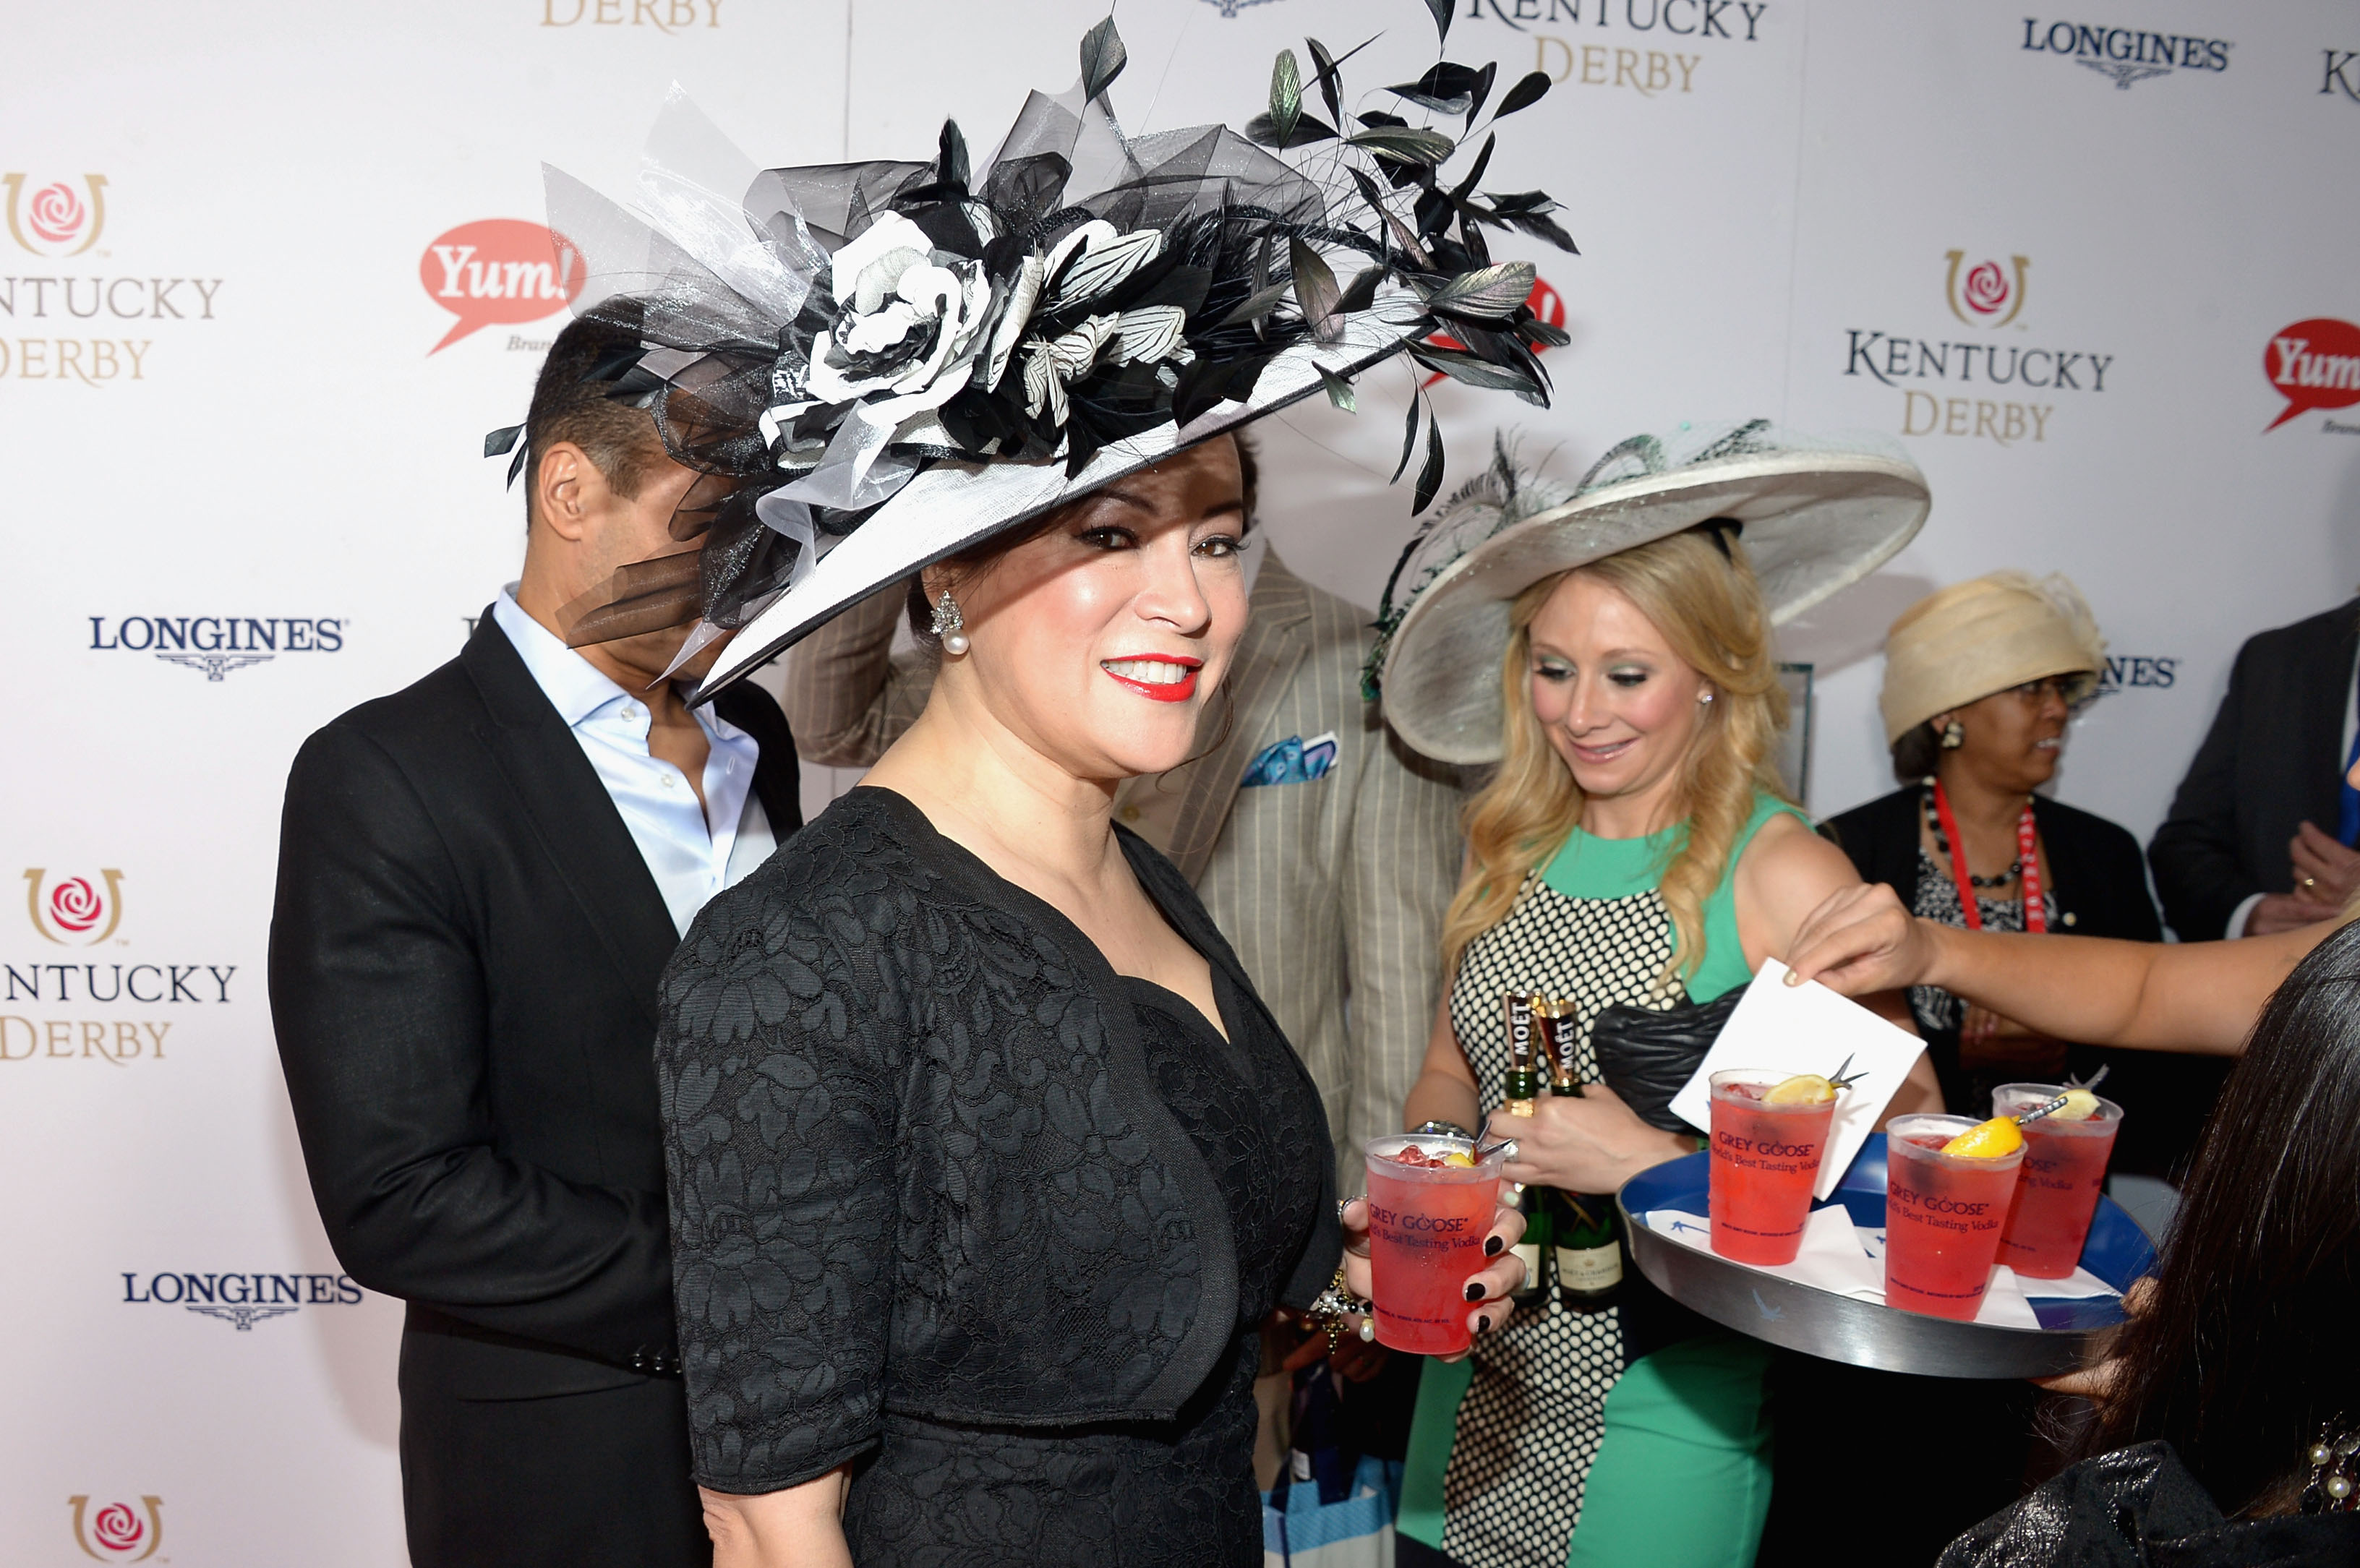 LOUISVILLE, KY - MAY 04:  Jennifer Tilly at the GREY GOOSE Red Carpet Lounge at the Kentucky Derby at Churchill Downs on May 4, 2013 in Louisville, Kentucky.  (Photo by Theo Wargo/Getty Images for GREY GOOSE)